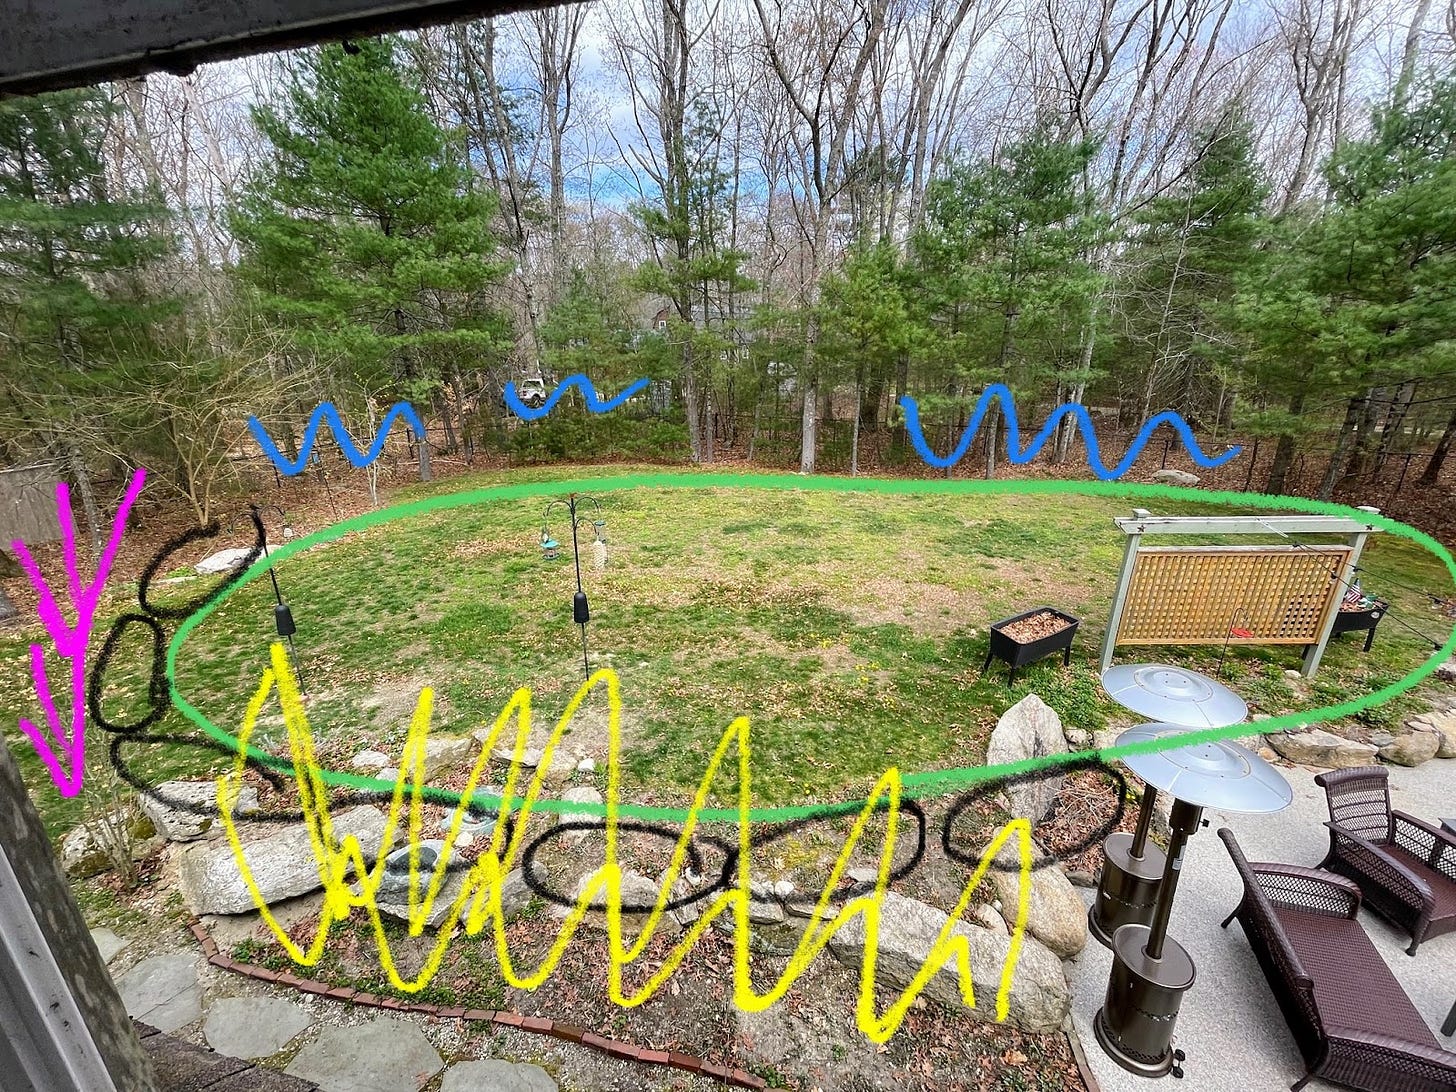 Image of Lawn marked up to show how defined shapes signal intentionality